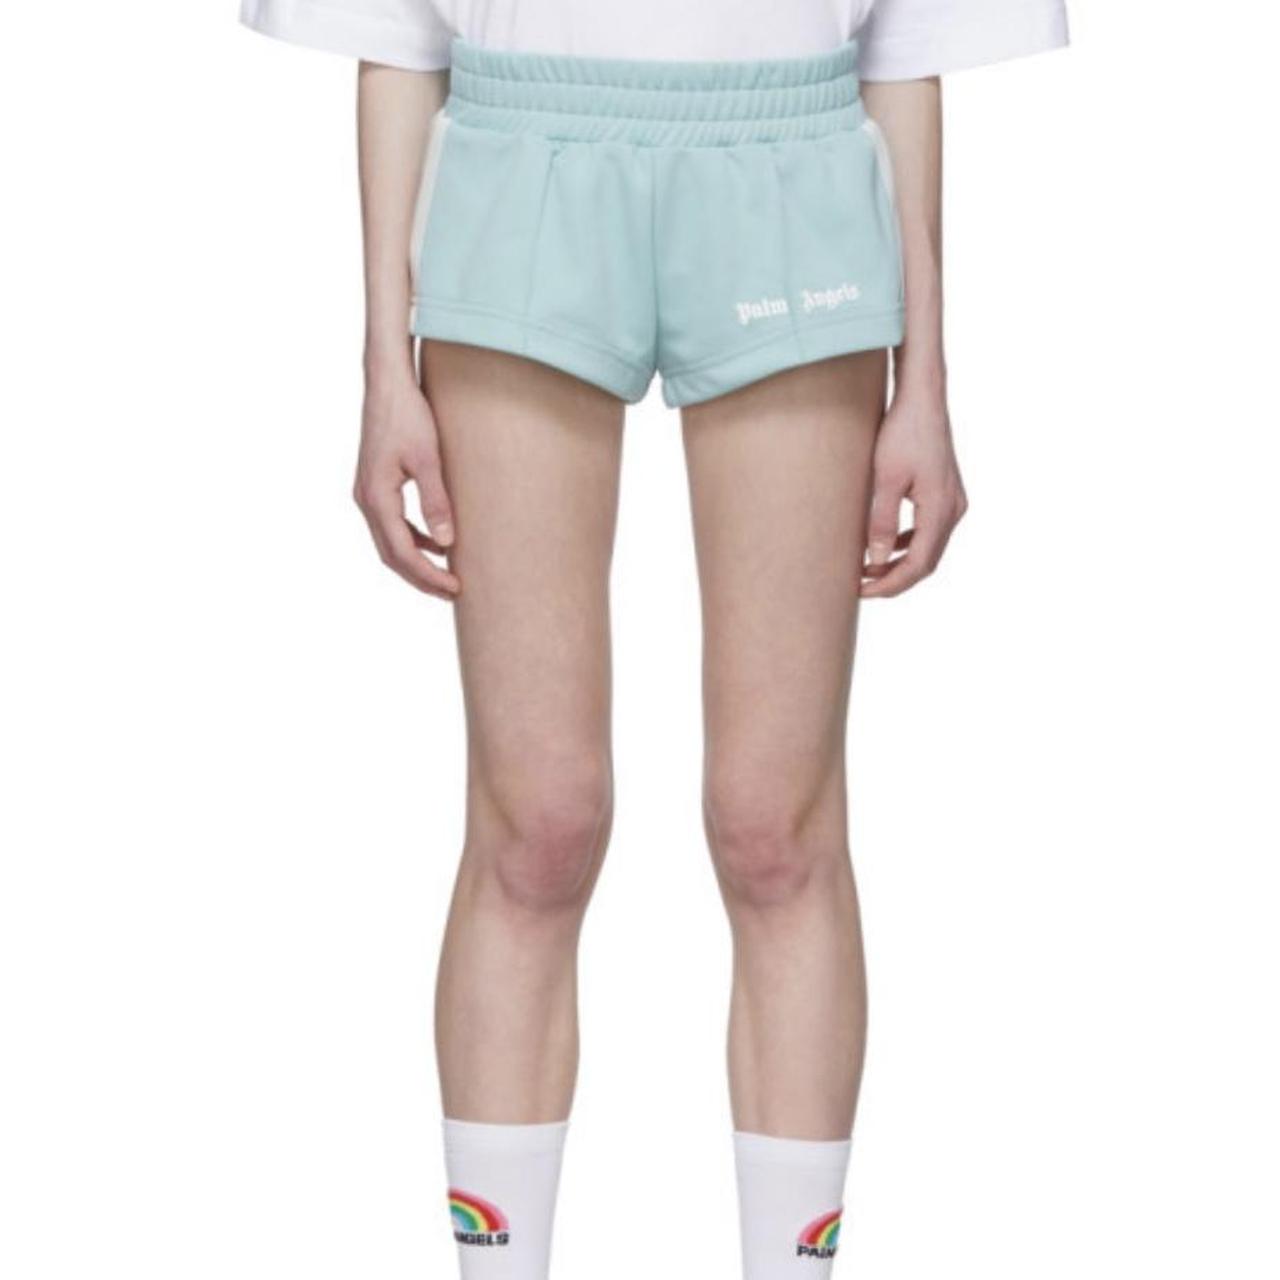 Palm Angels Women's Blue and White Shorts